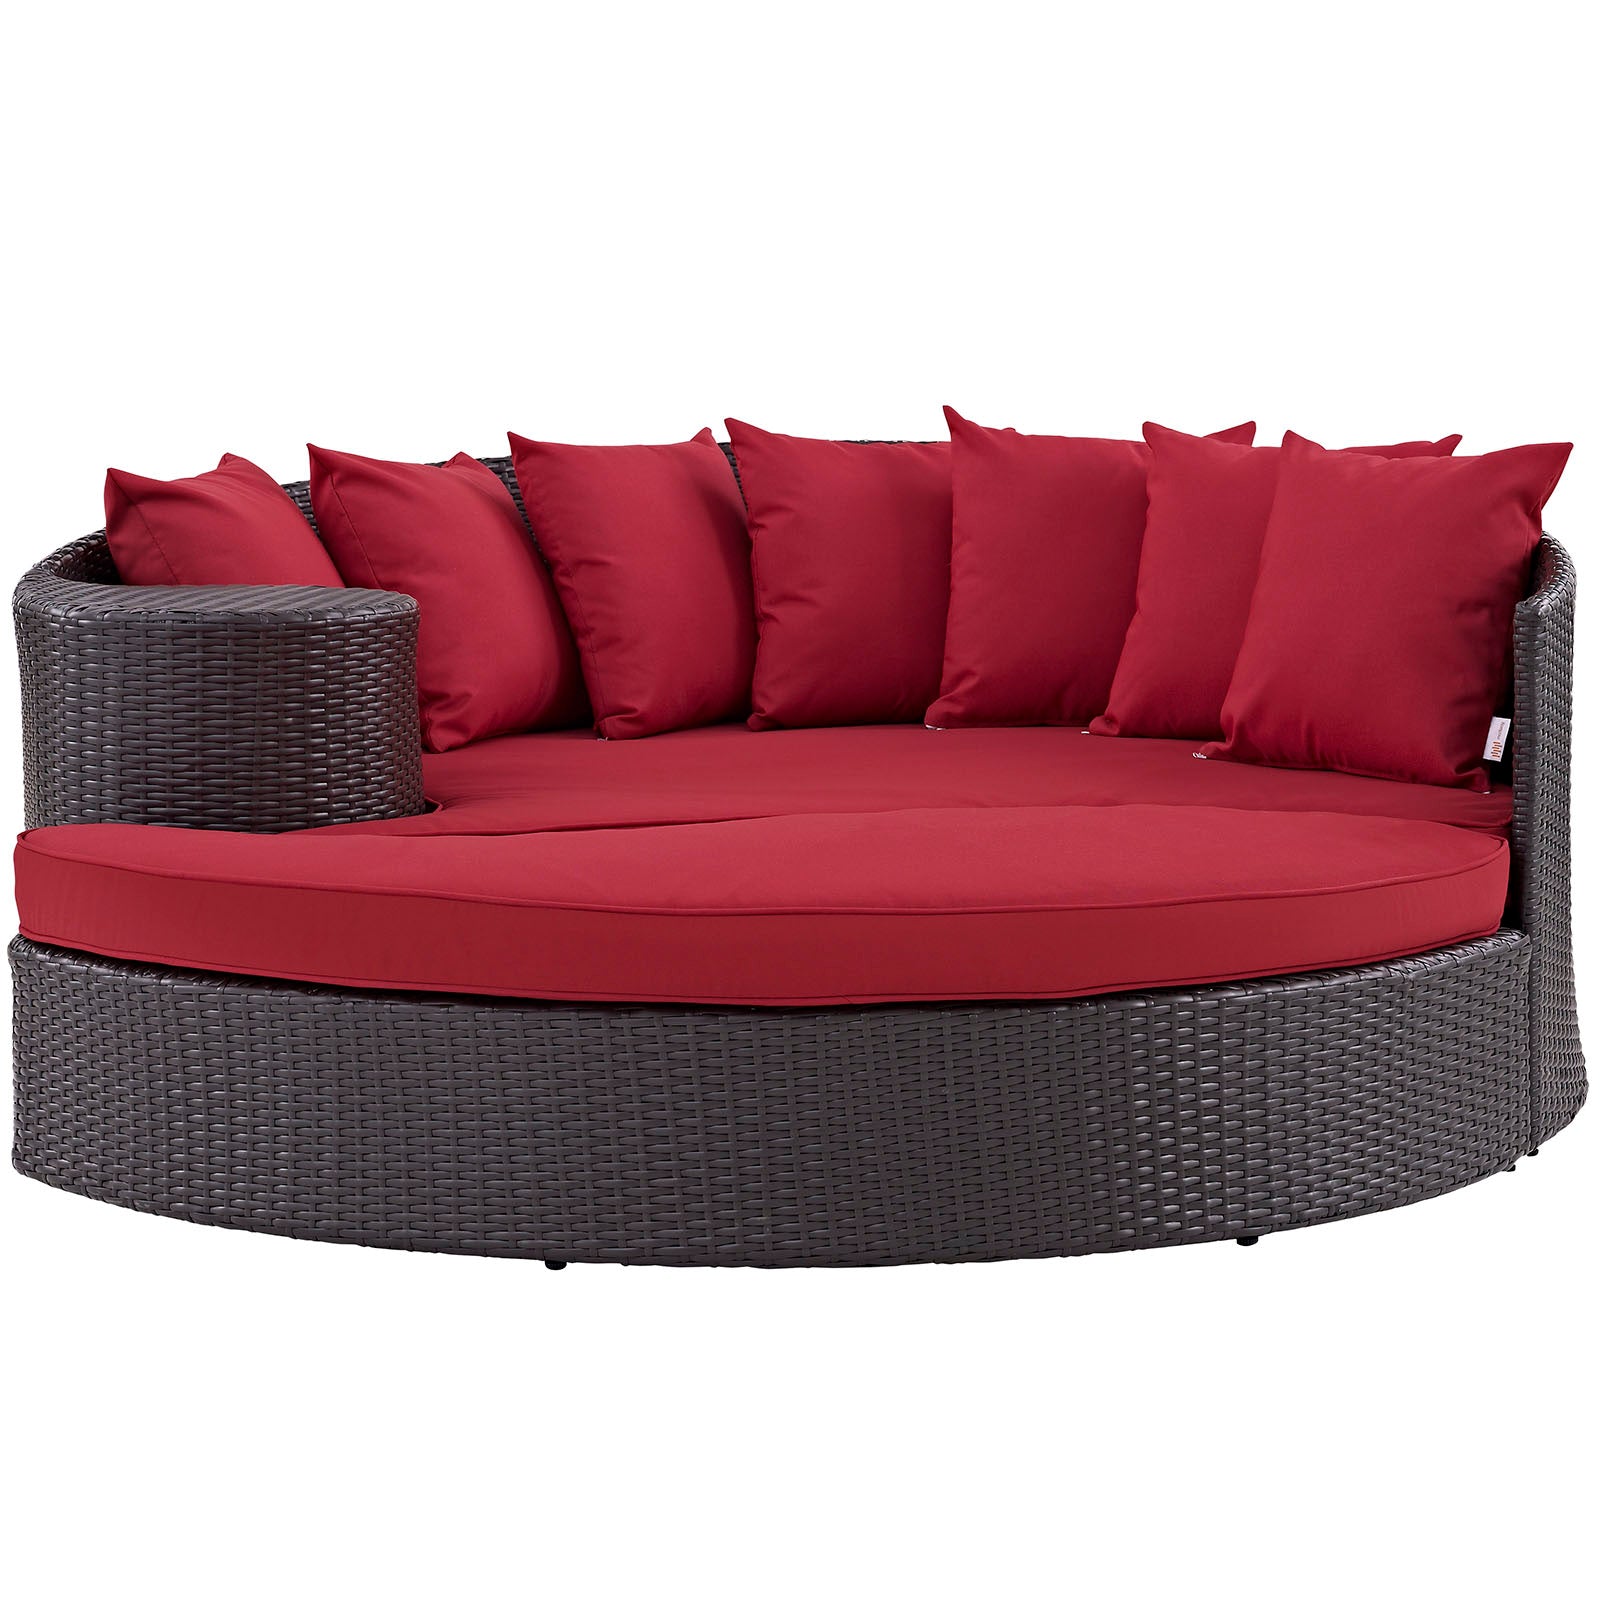 Modway Patio Daybeds - Convene Outdoor Patio Daybed Espresso Red